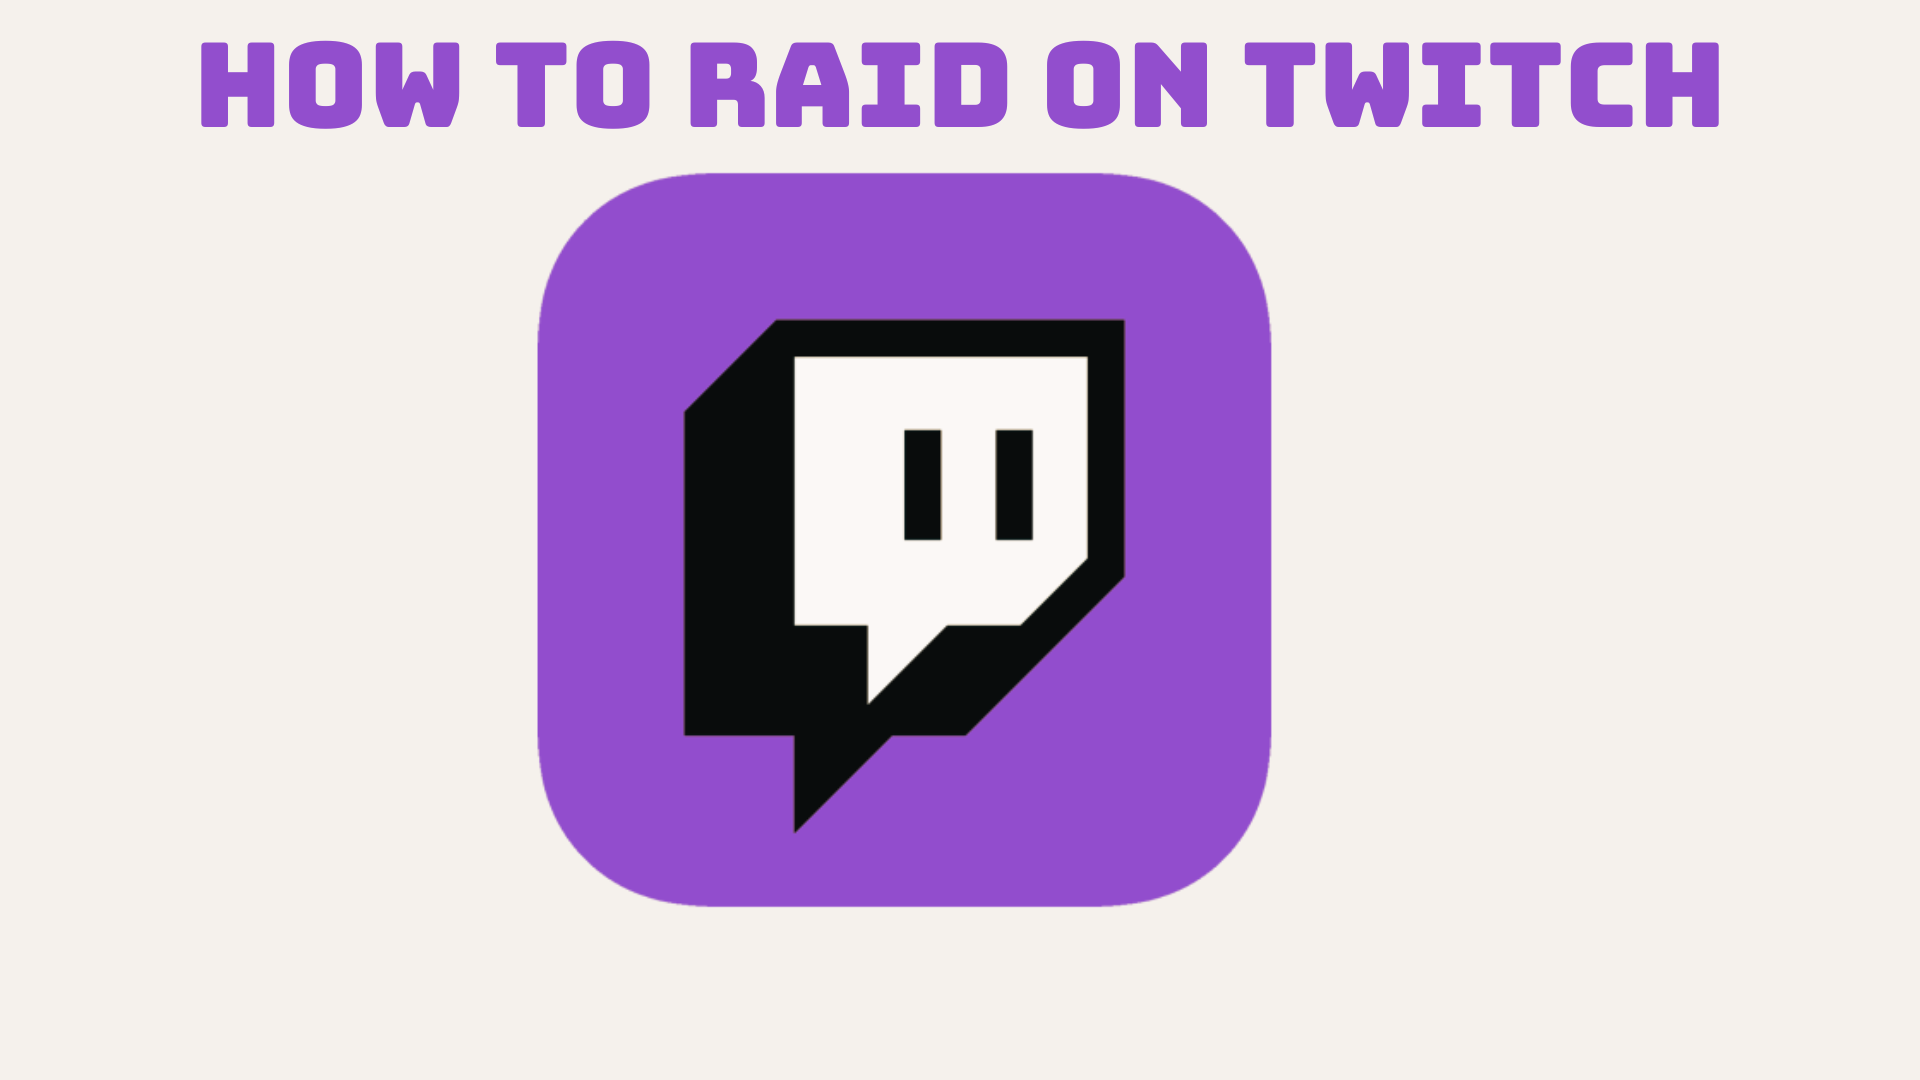 How to Raid on Twitch | Guide for Beginners - TechOwns